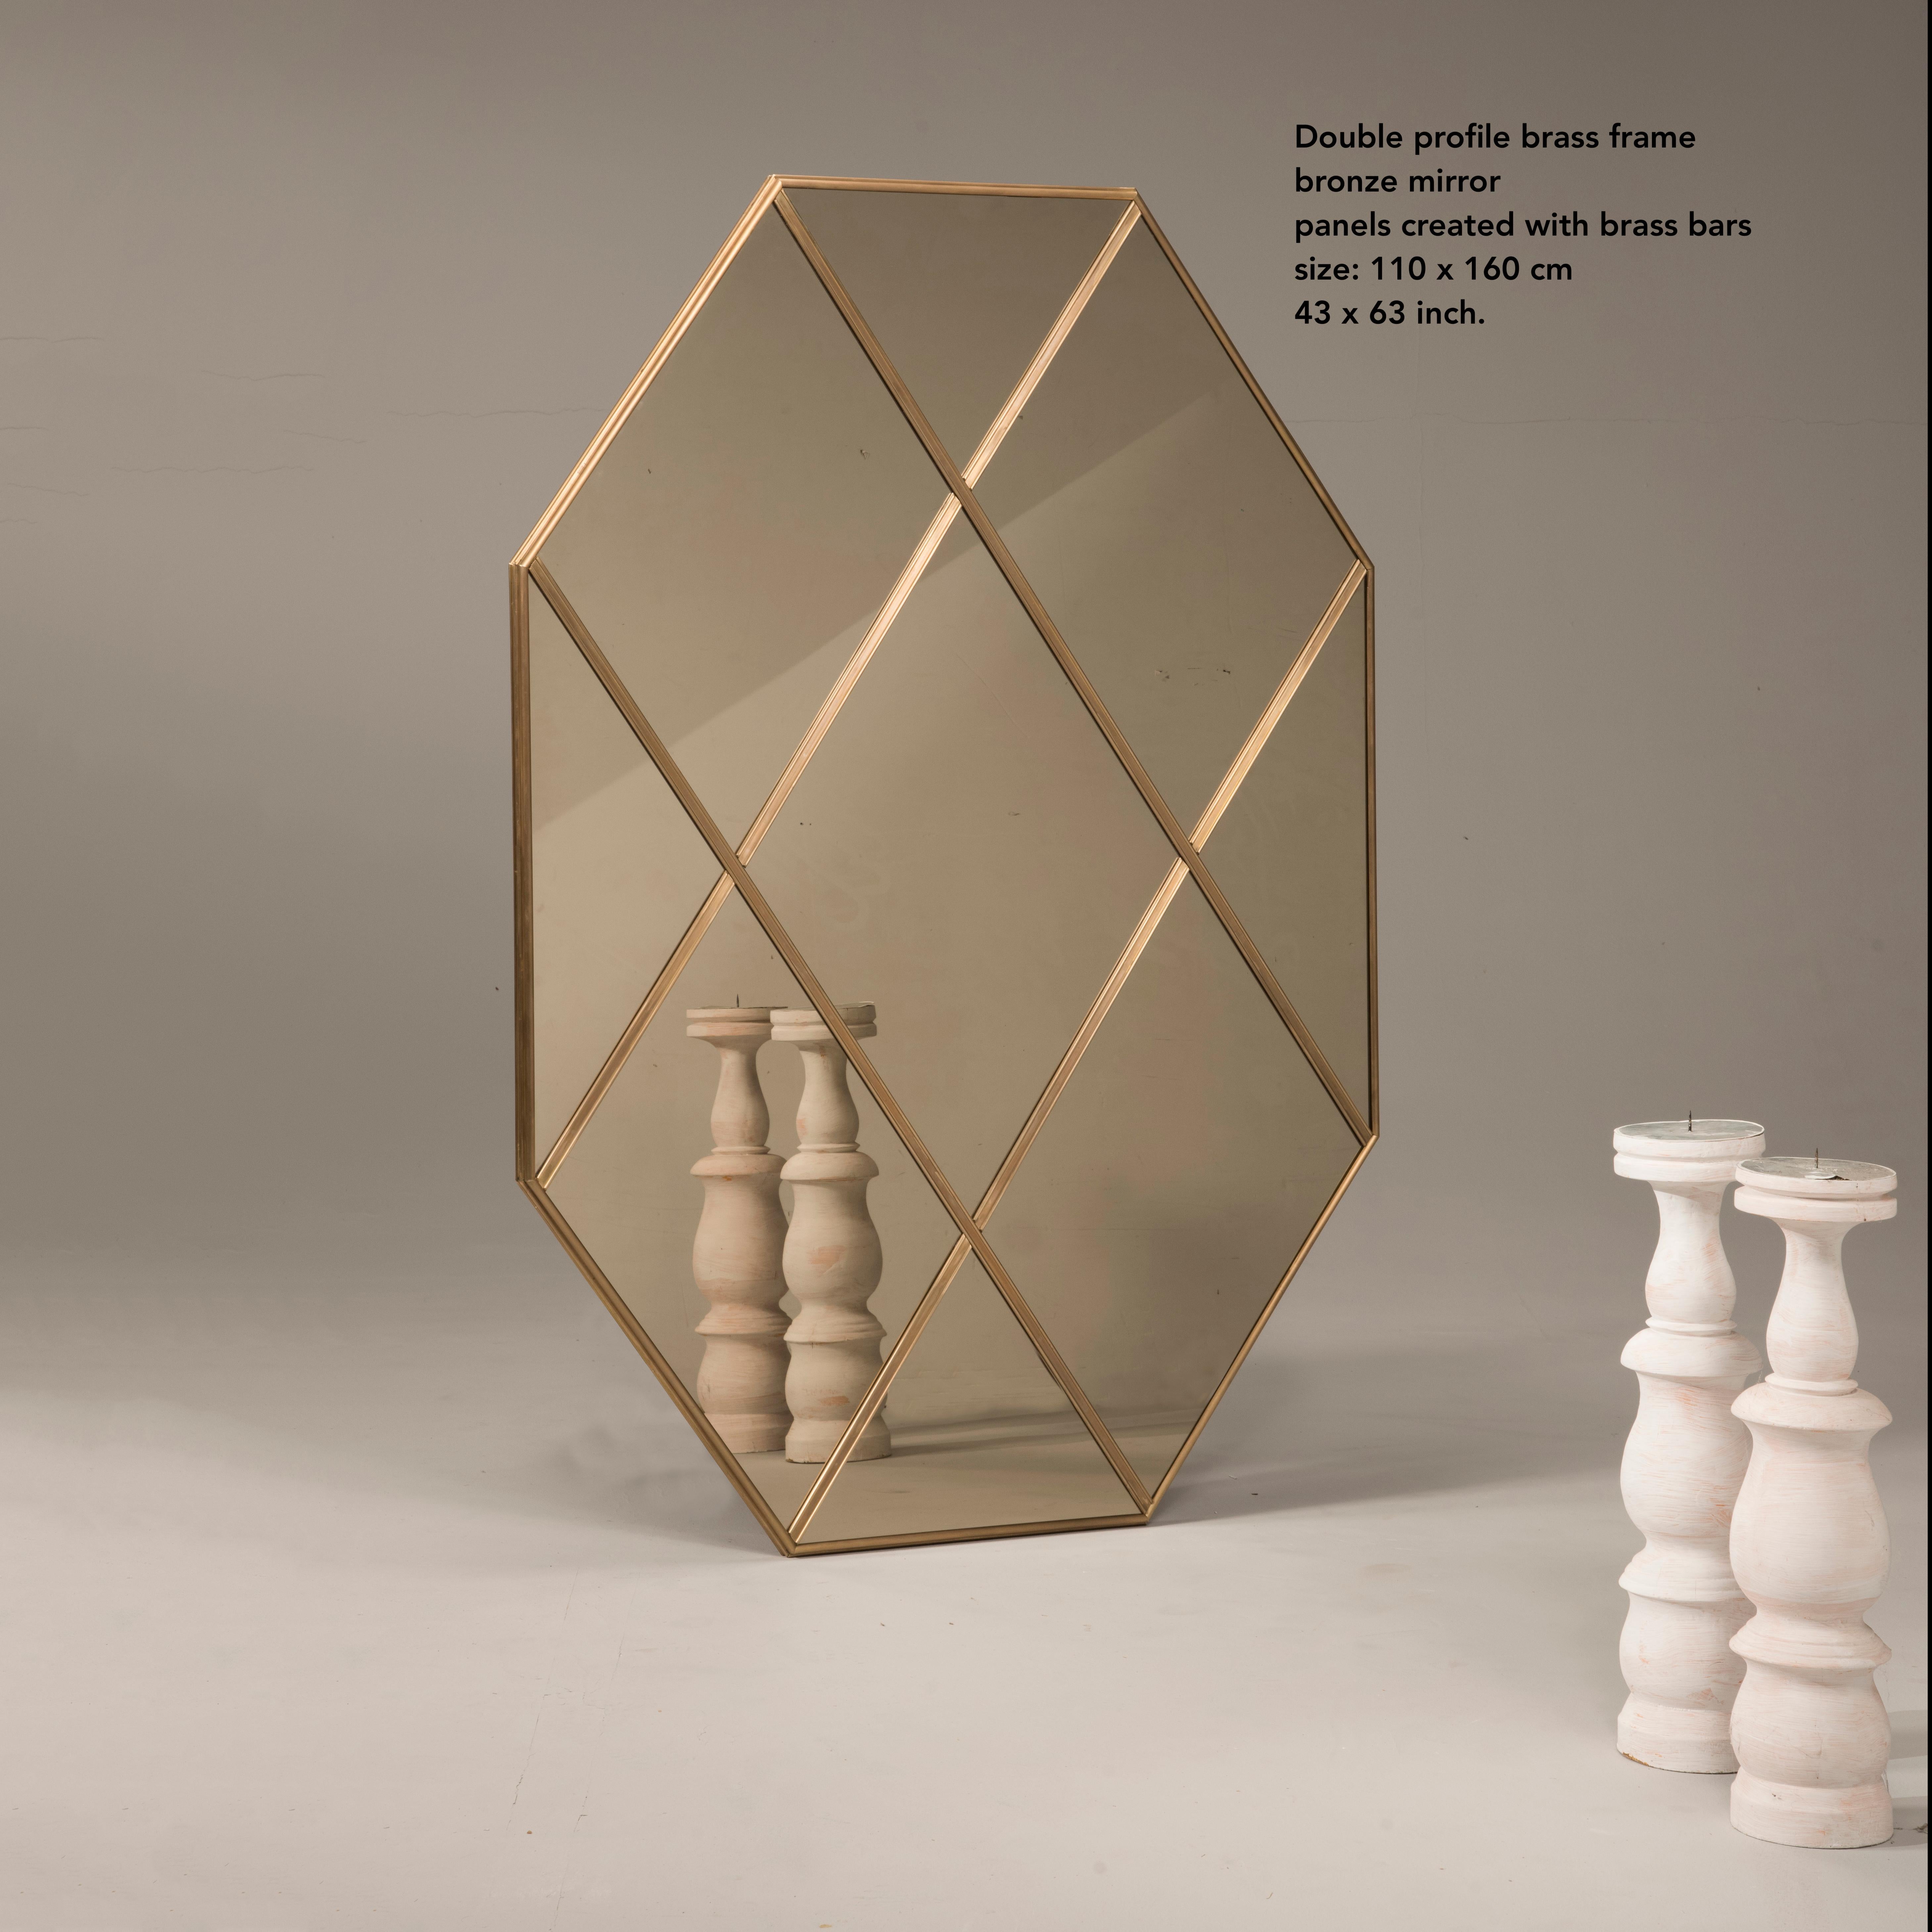 Pescetta presents its new collection of contemporary customizable brass frame mirrors. With frame made of brass and multi panels window look, these mirrors replicate the idea of early 20th century Art Deco style. They suit both modern spaces which